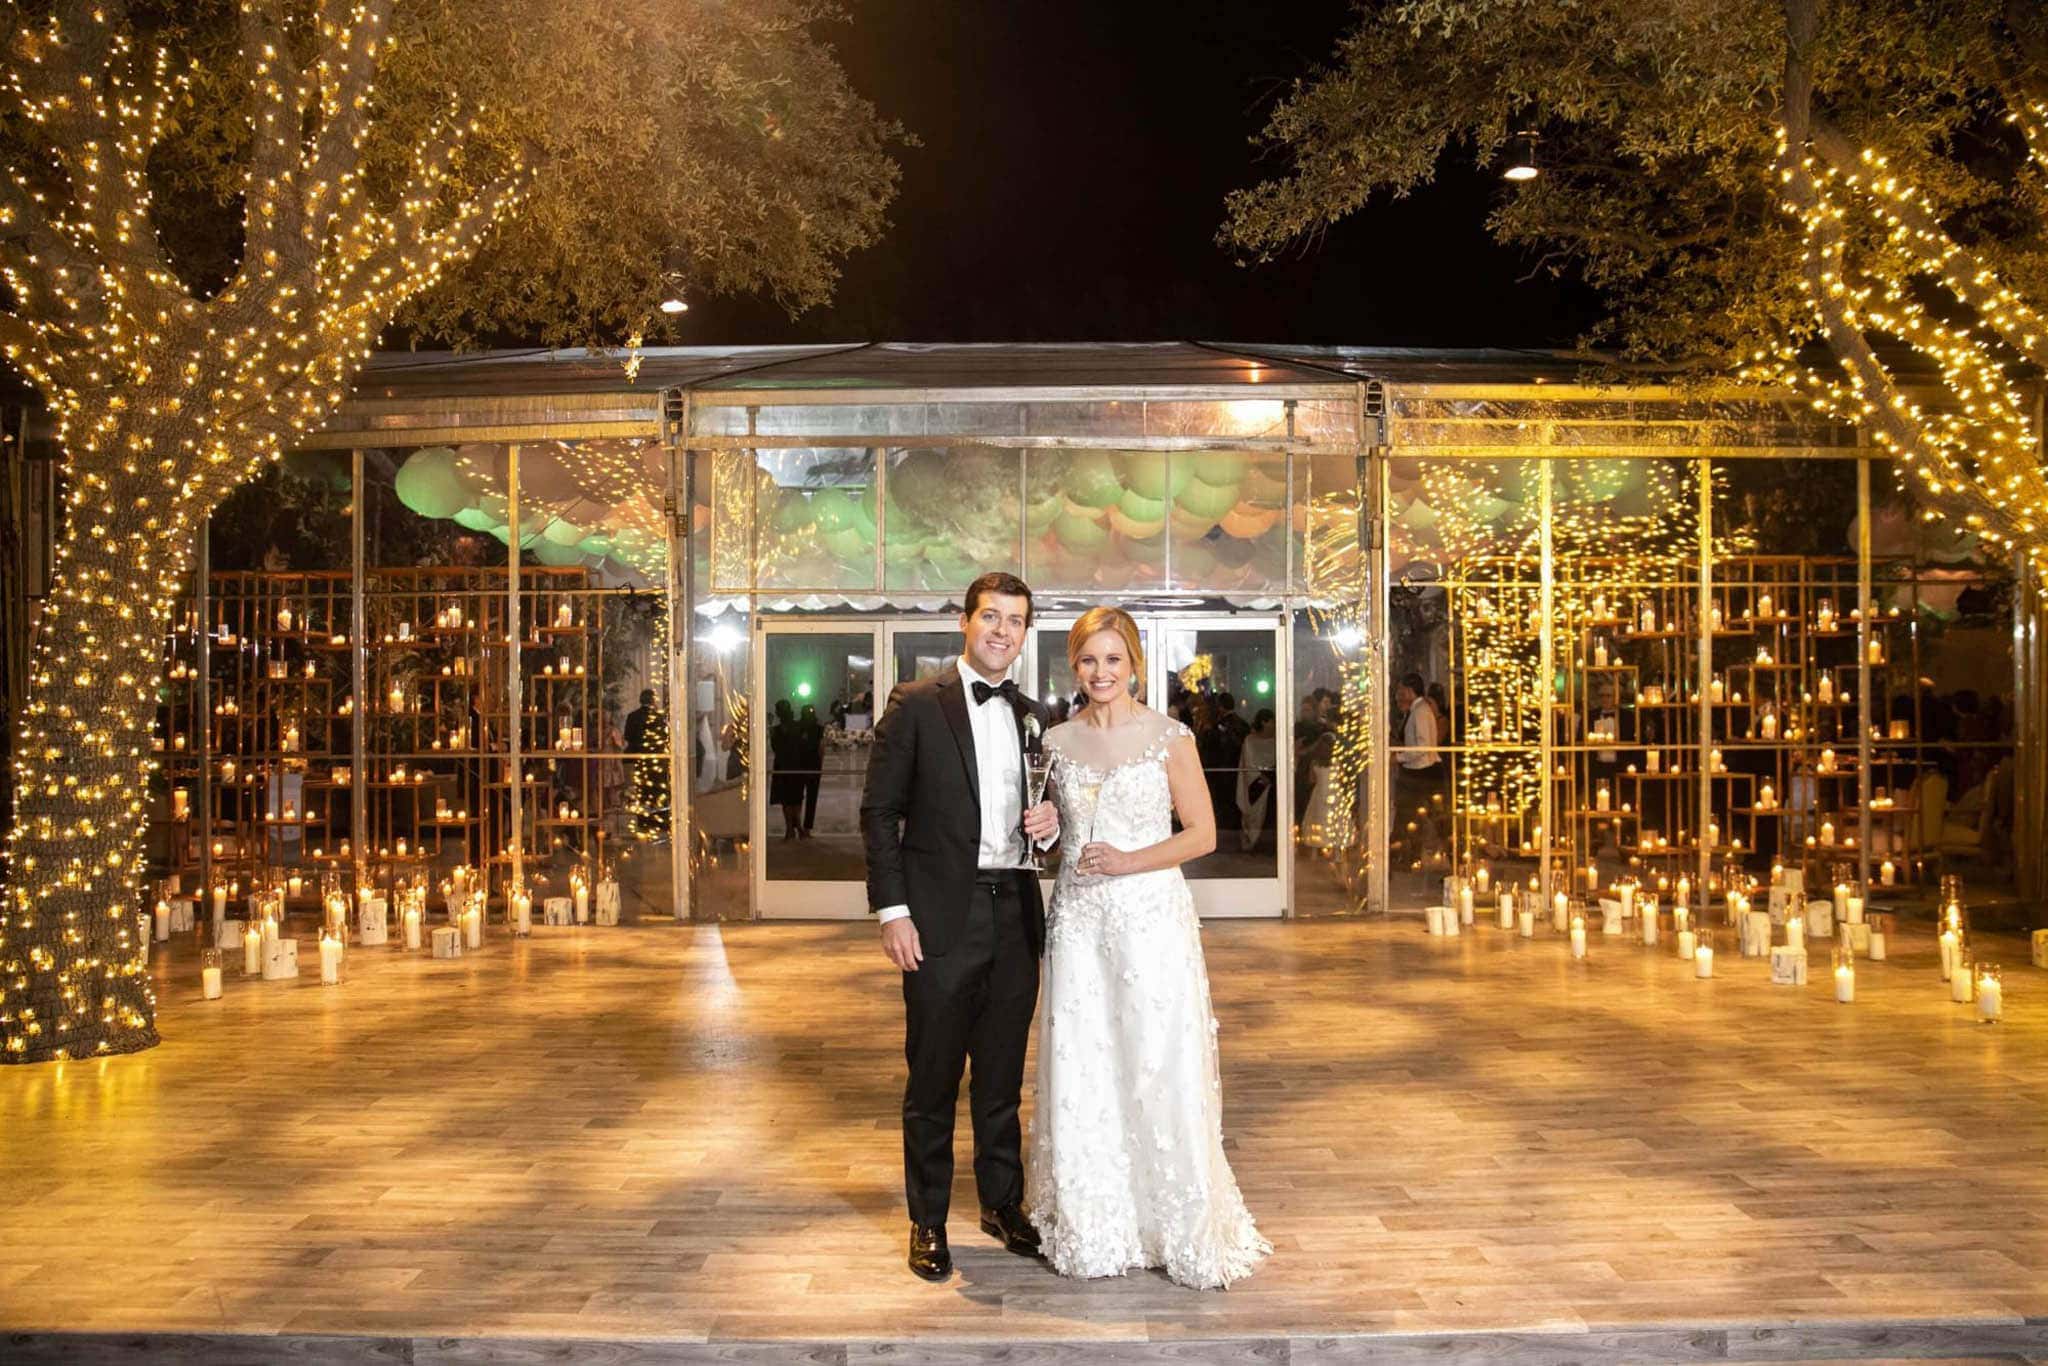 Carter and Stephen’s Luxury Wedding Reception in Midland | Dallas Luxury Event Rental Company